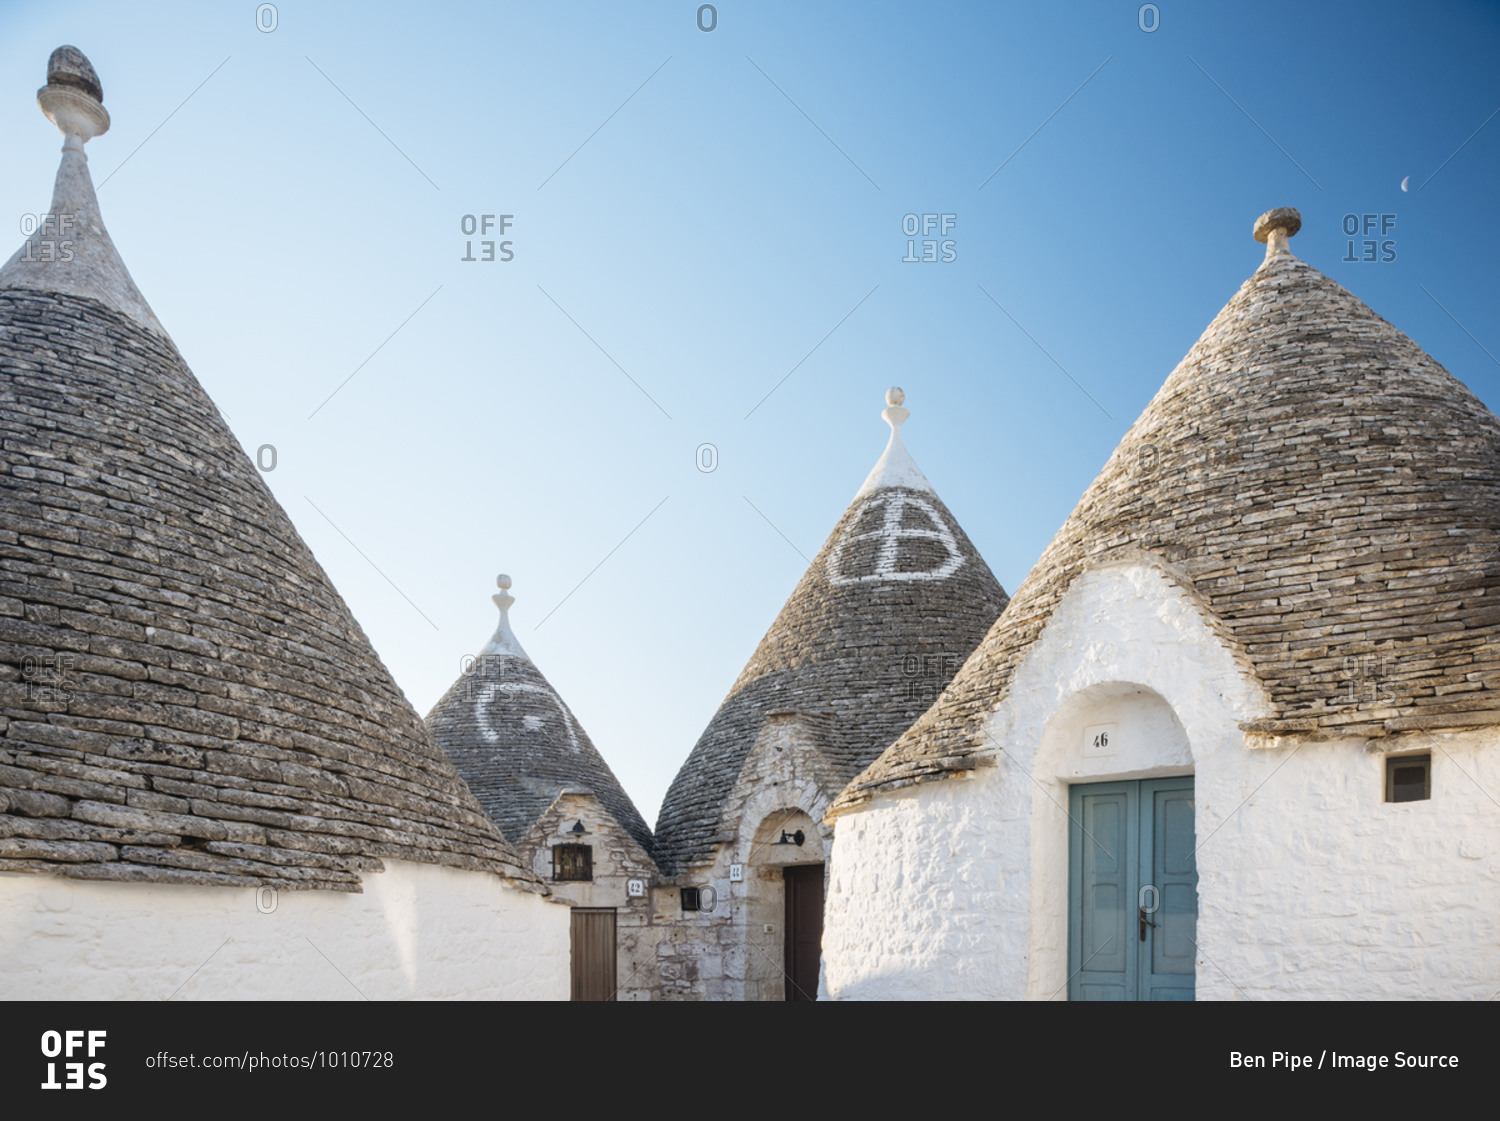 Four whitewashed trullo houses with conical roofs, Alberobello, Puglia, Italy